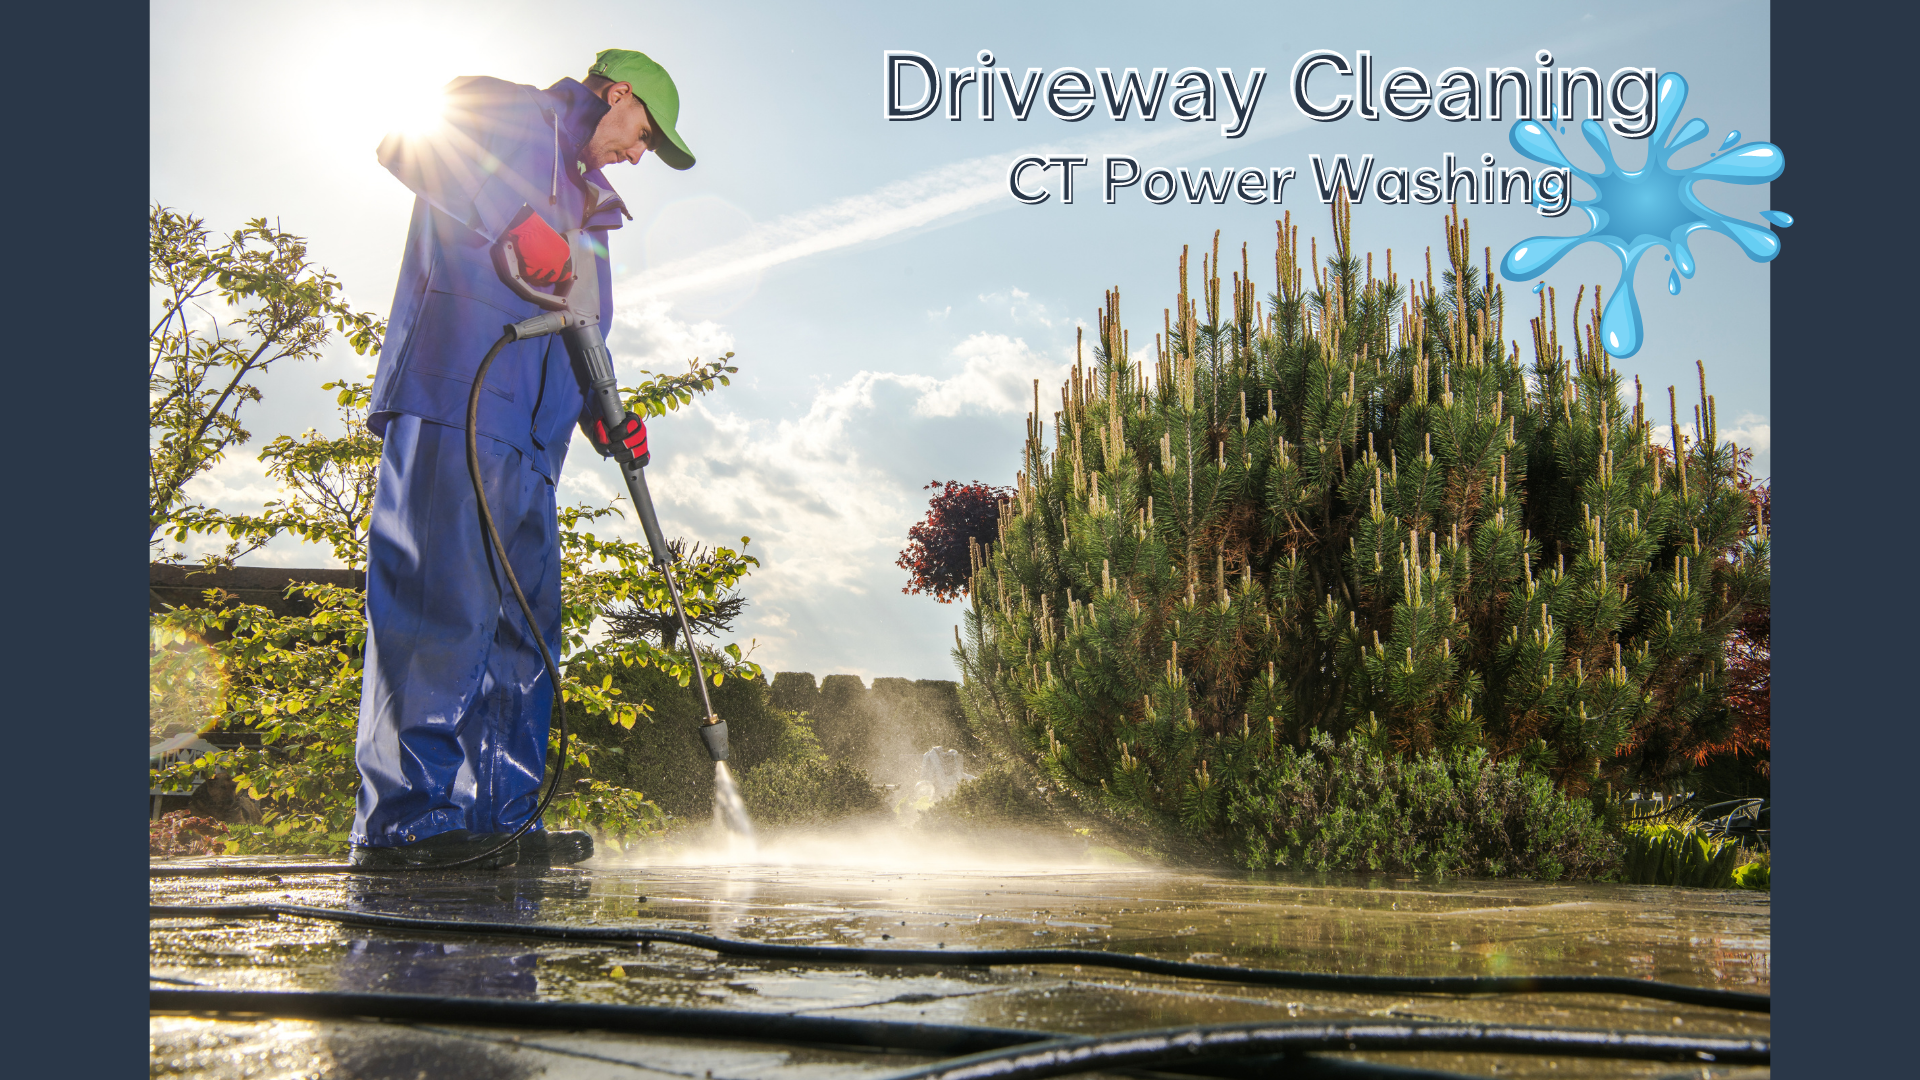 Driveway Cleaning Service Connecticut